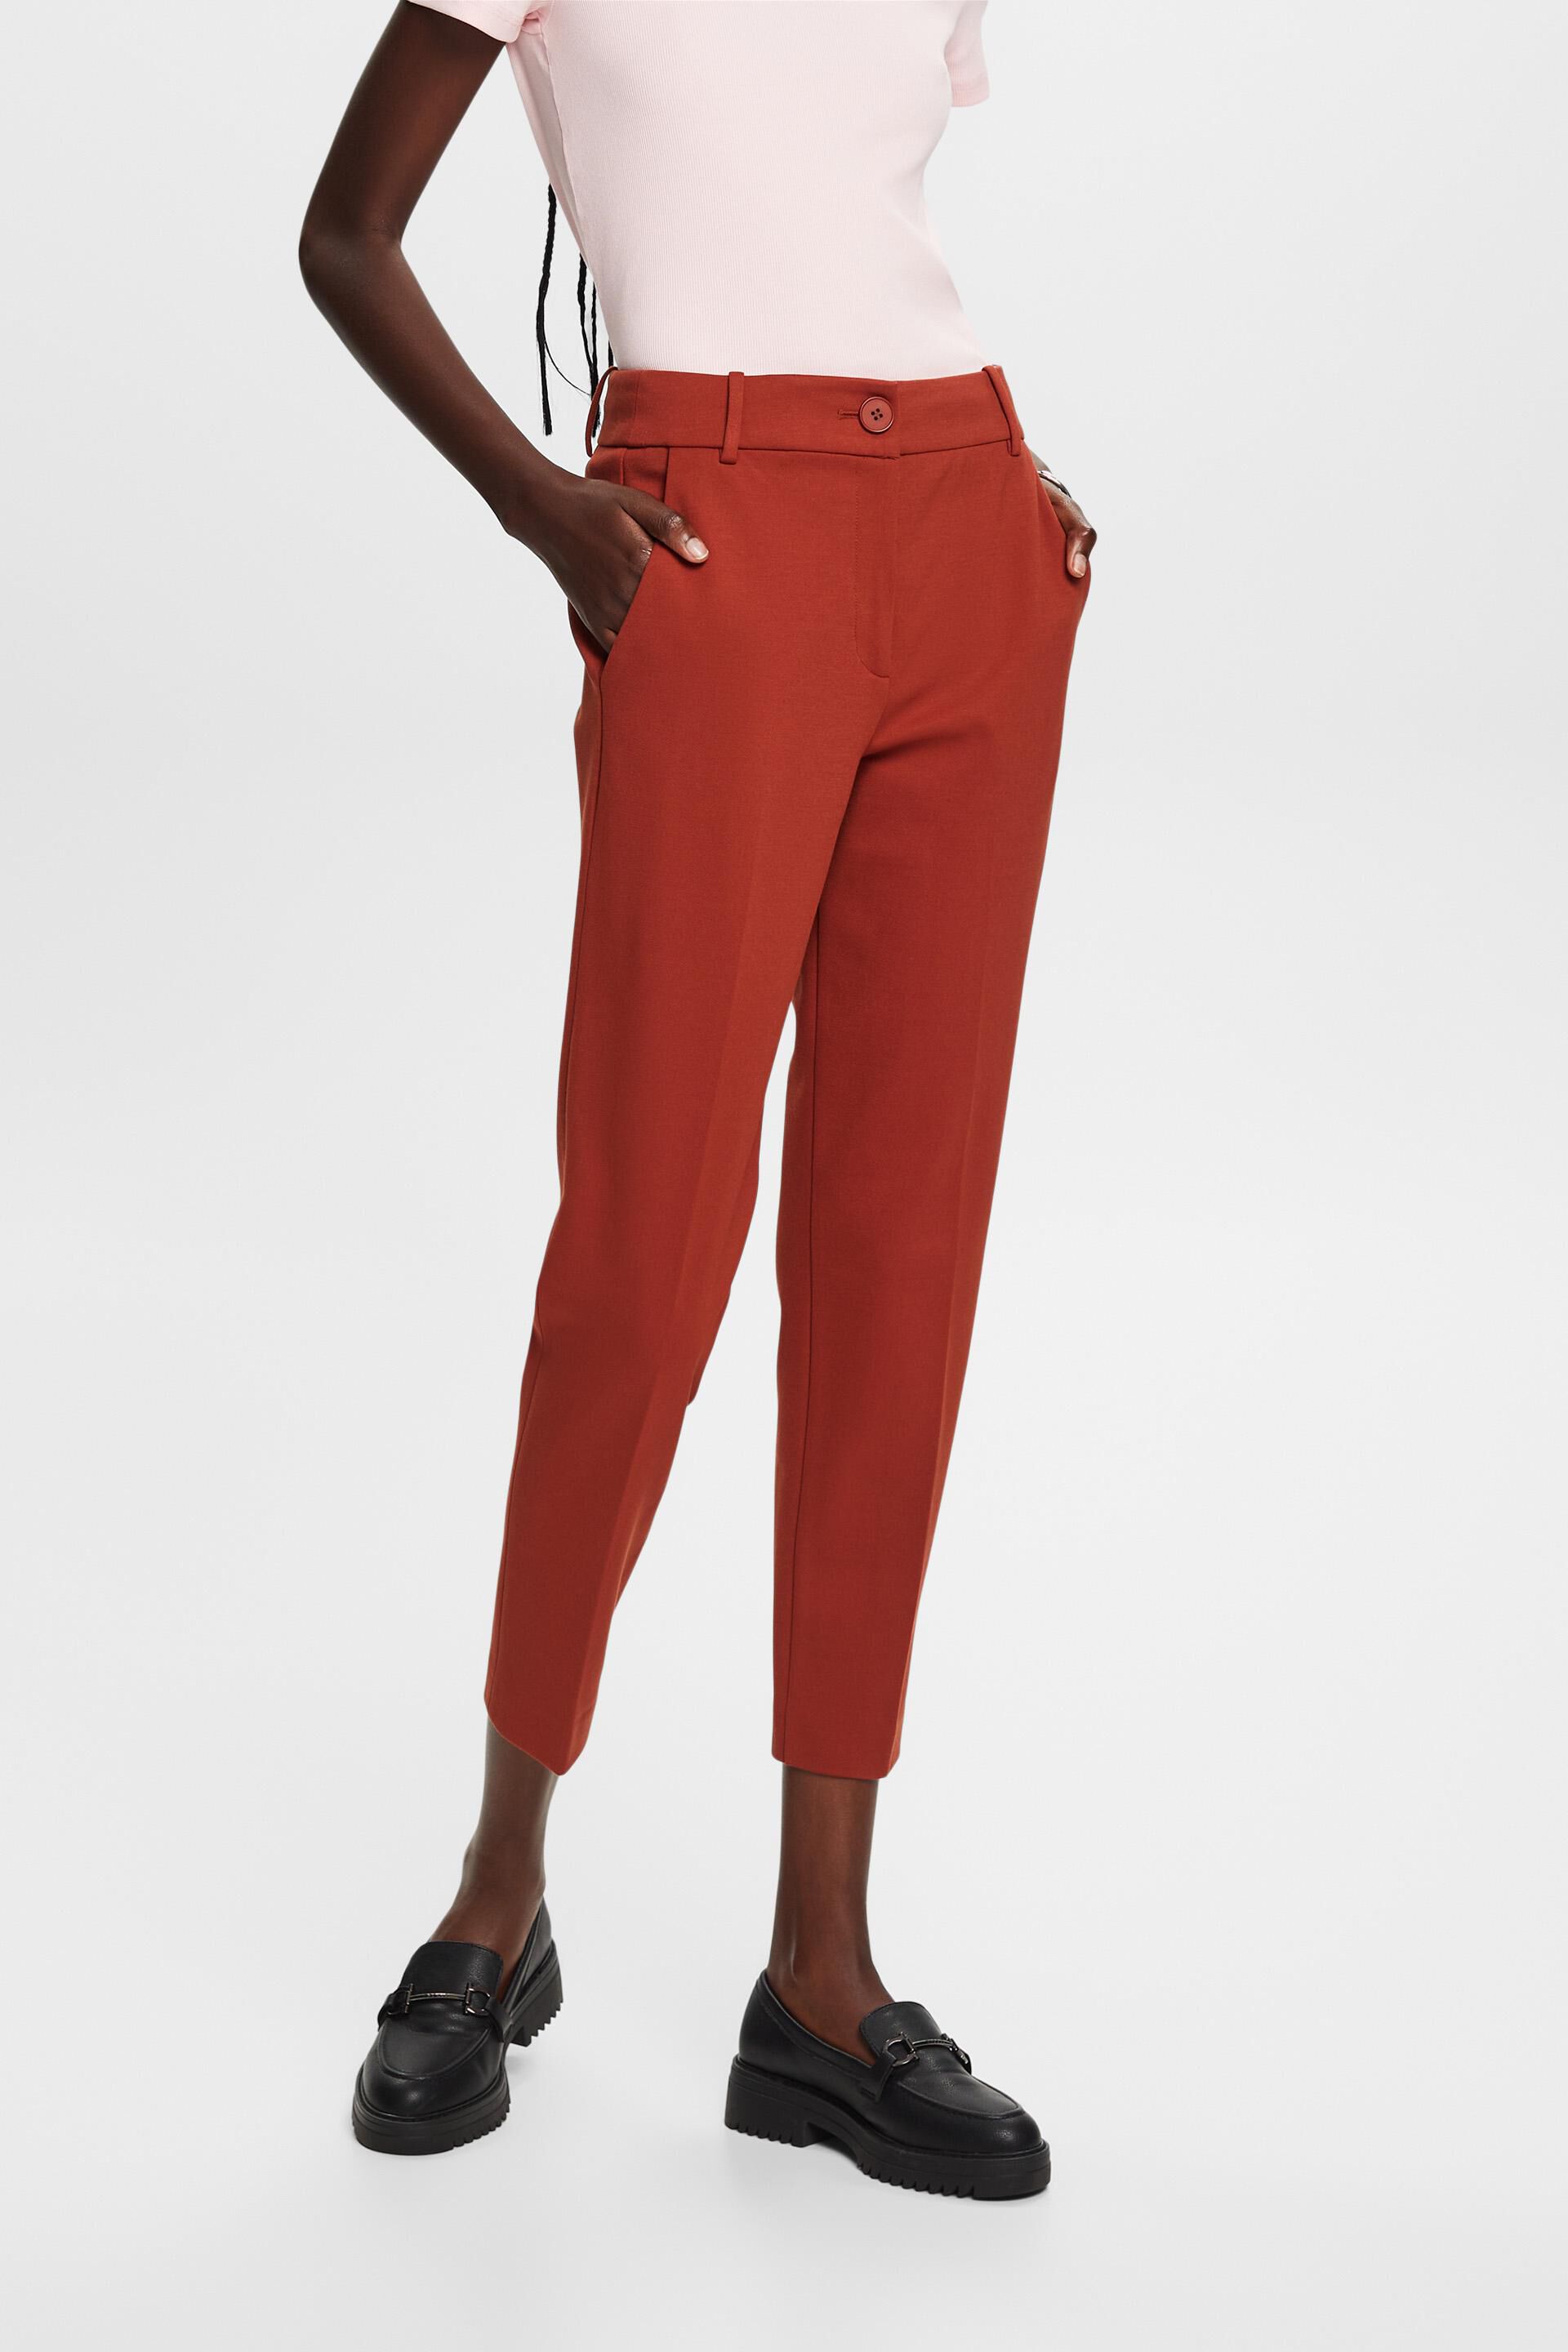 Esprit jersey trousers cropped Punto